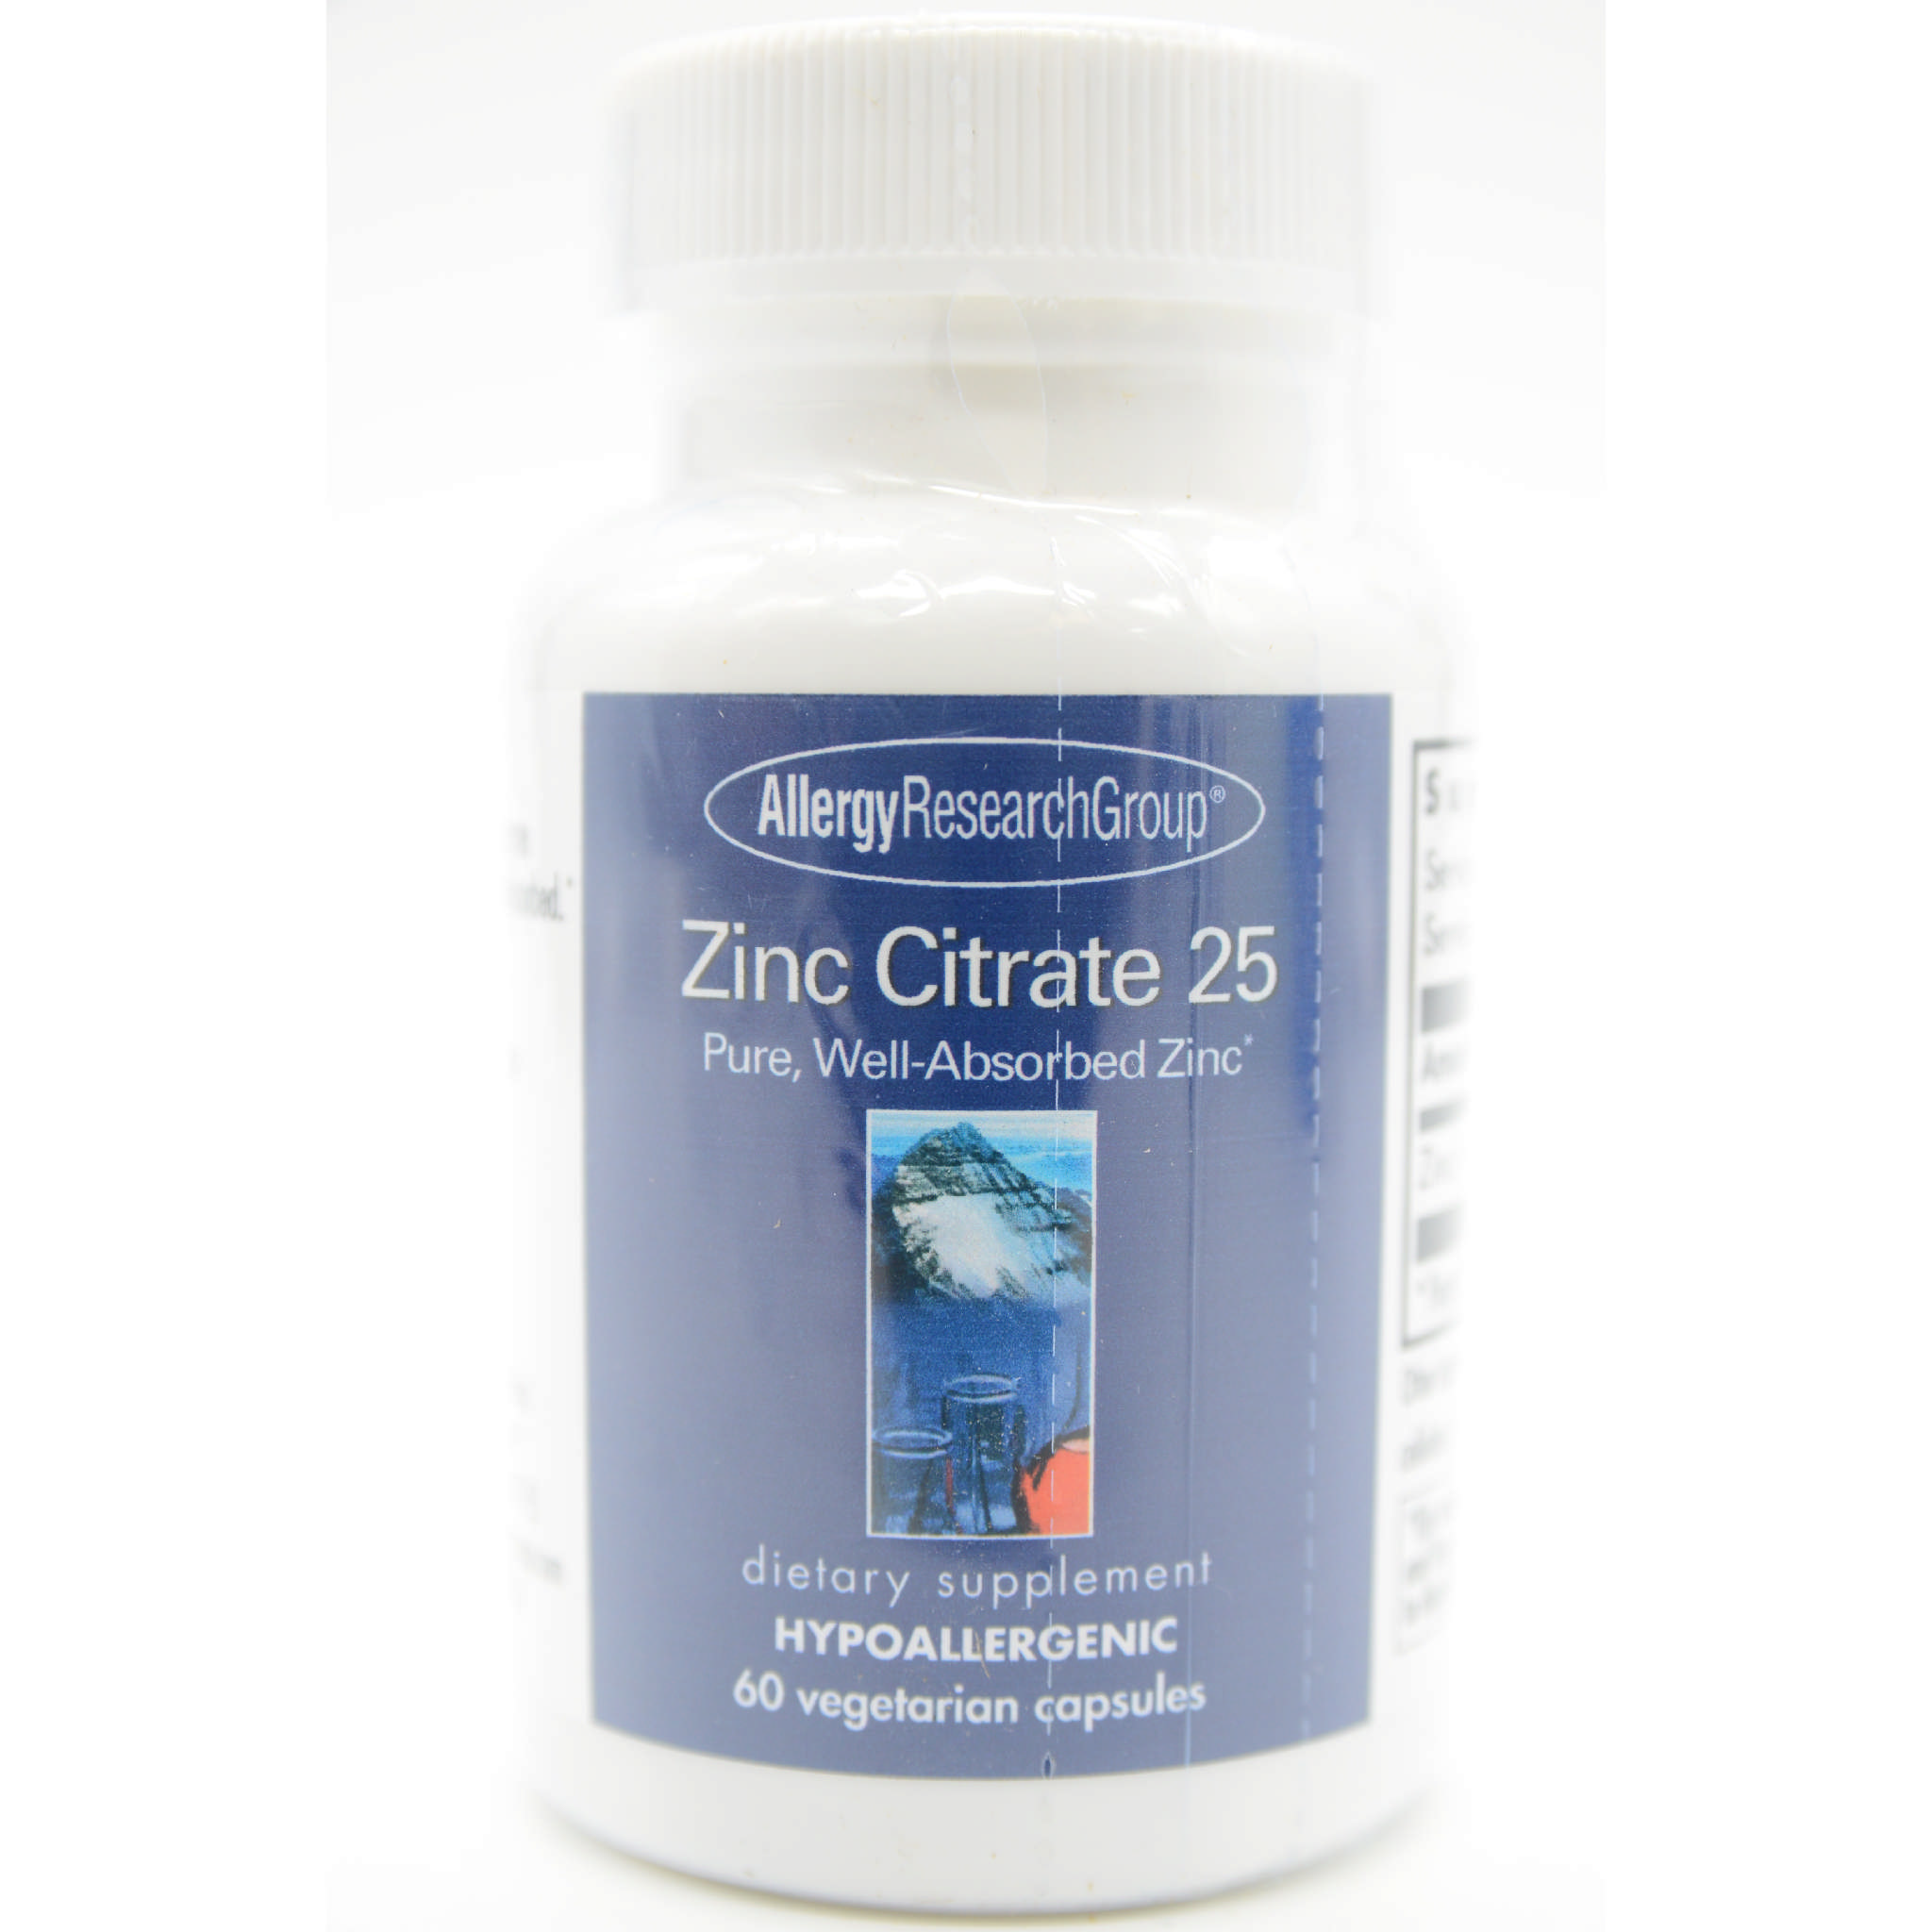 Allergy Research Group - Zinc Citrate 25